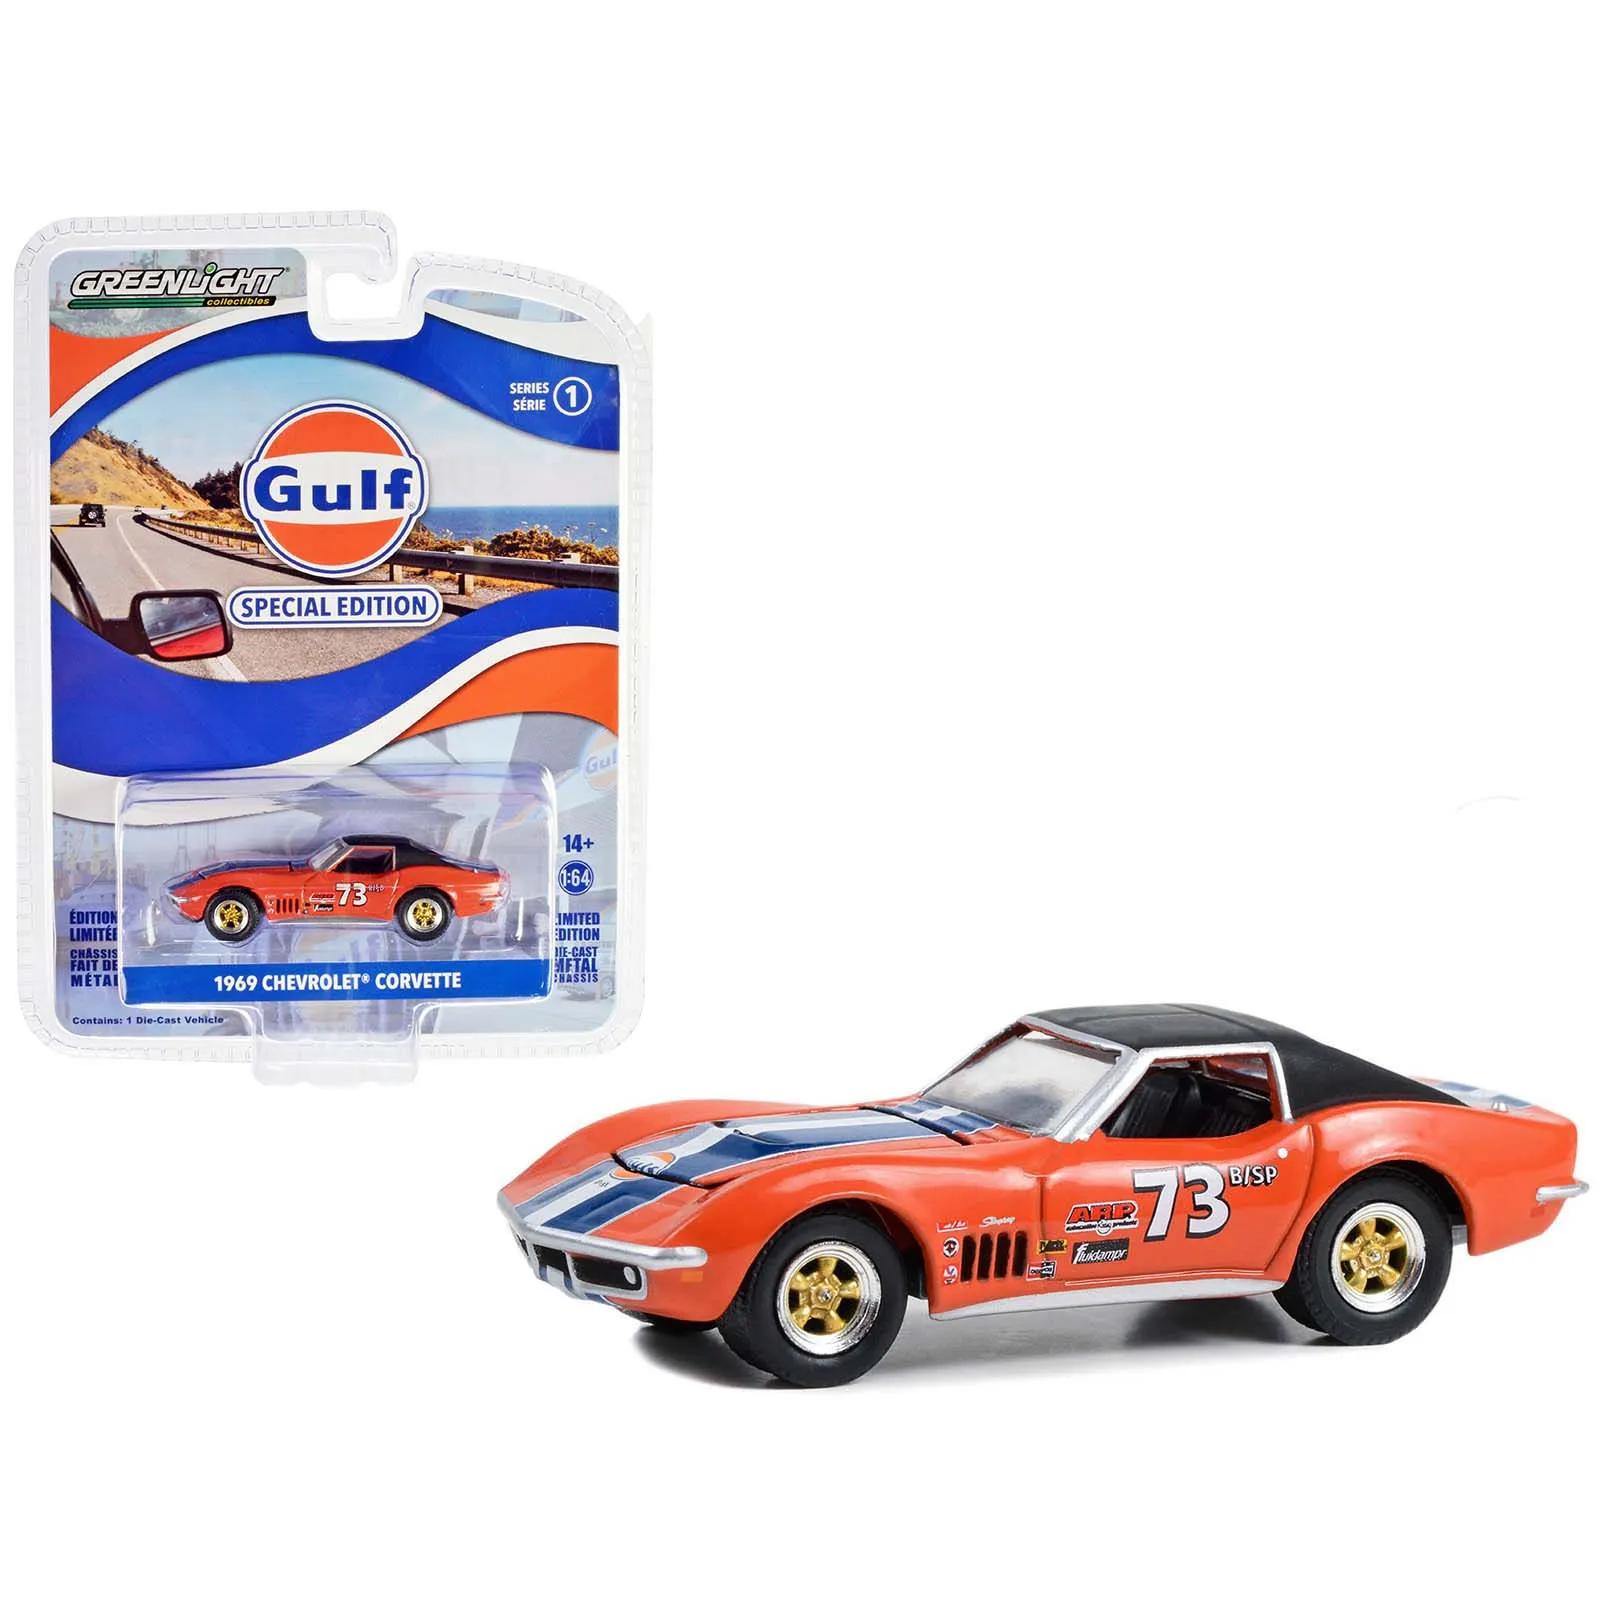 Greenlight 1/64 Gulf Oil Special Edition Series 1- 1969 Chevy Corvette #73 41135-B - Thumbnail